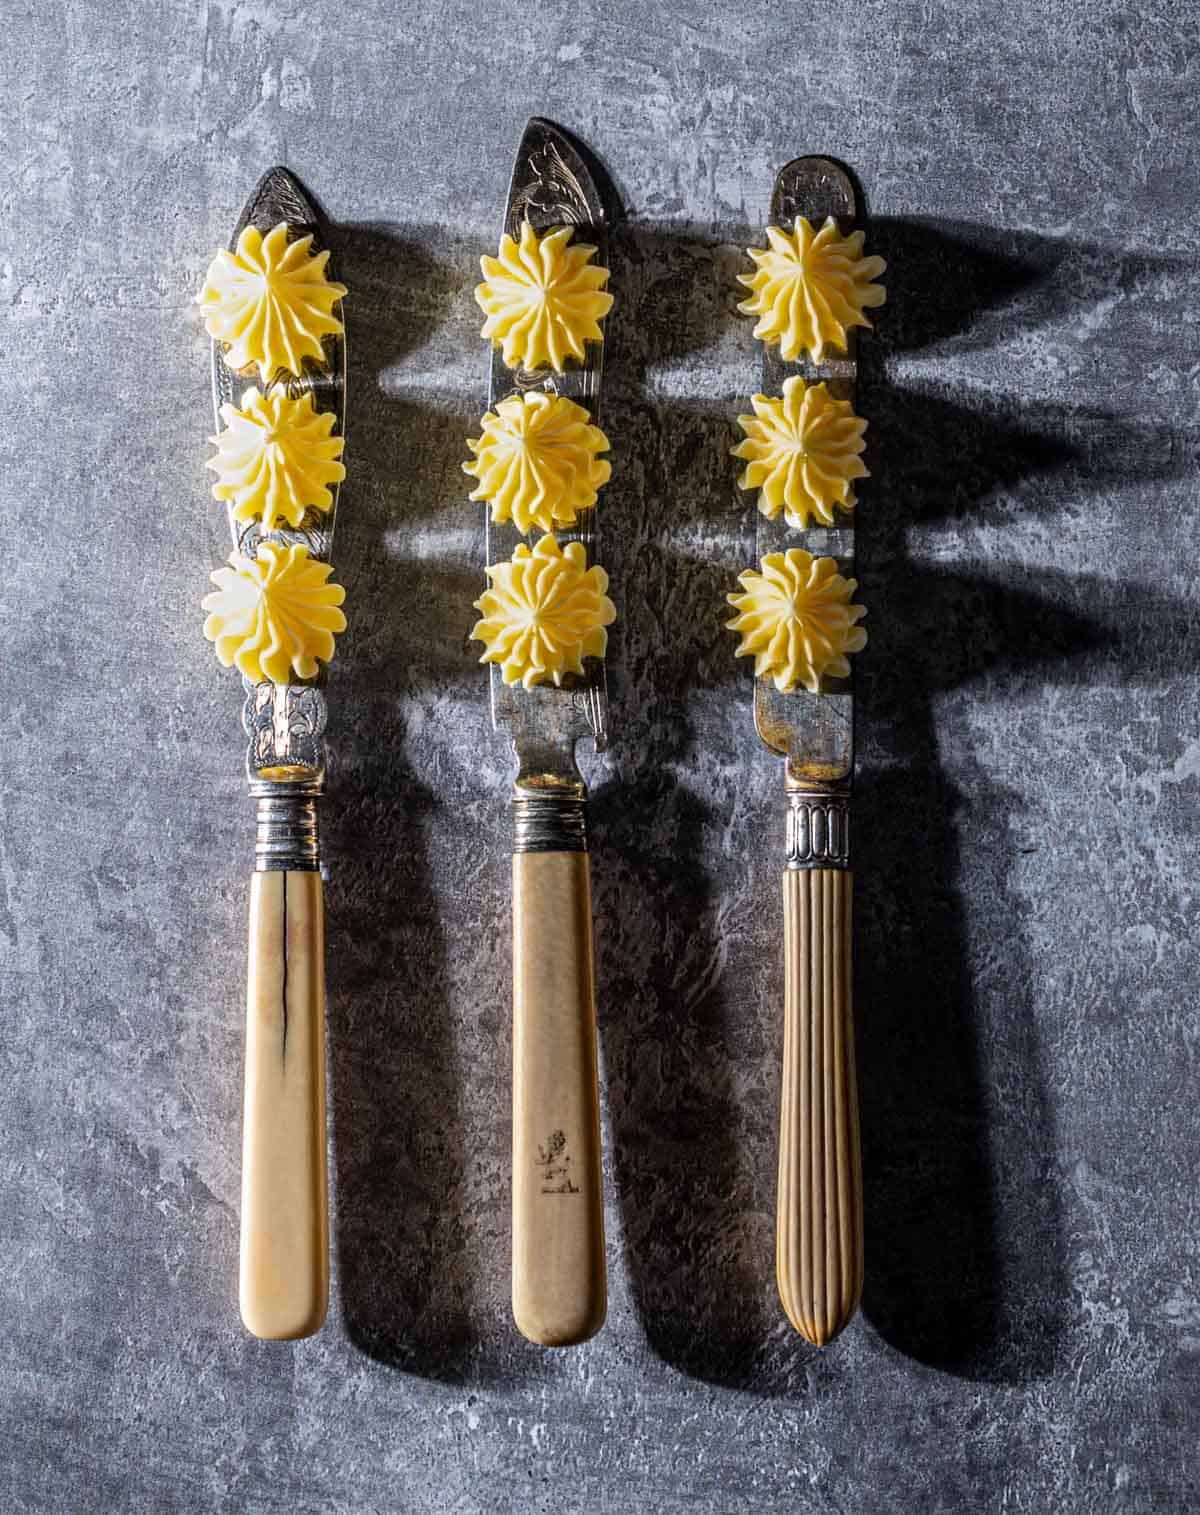 Three knifes with three butter rosettes on each blade.